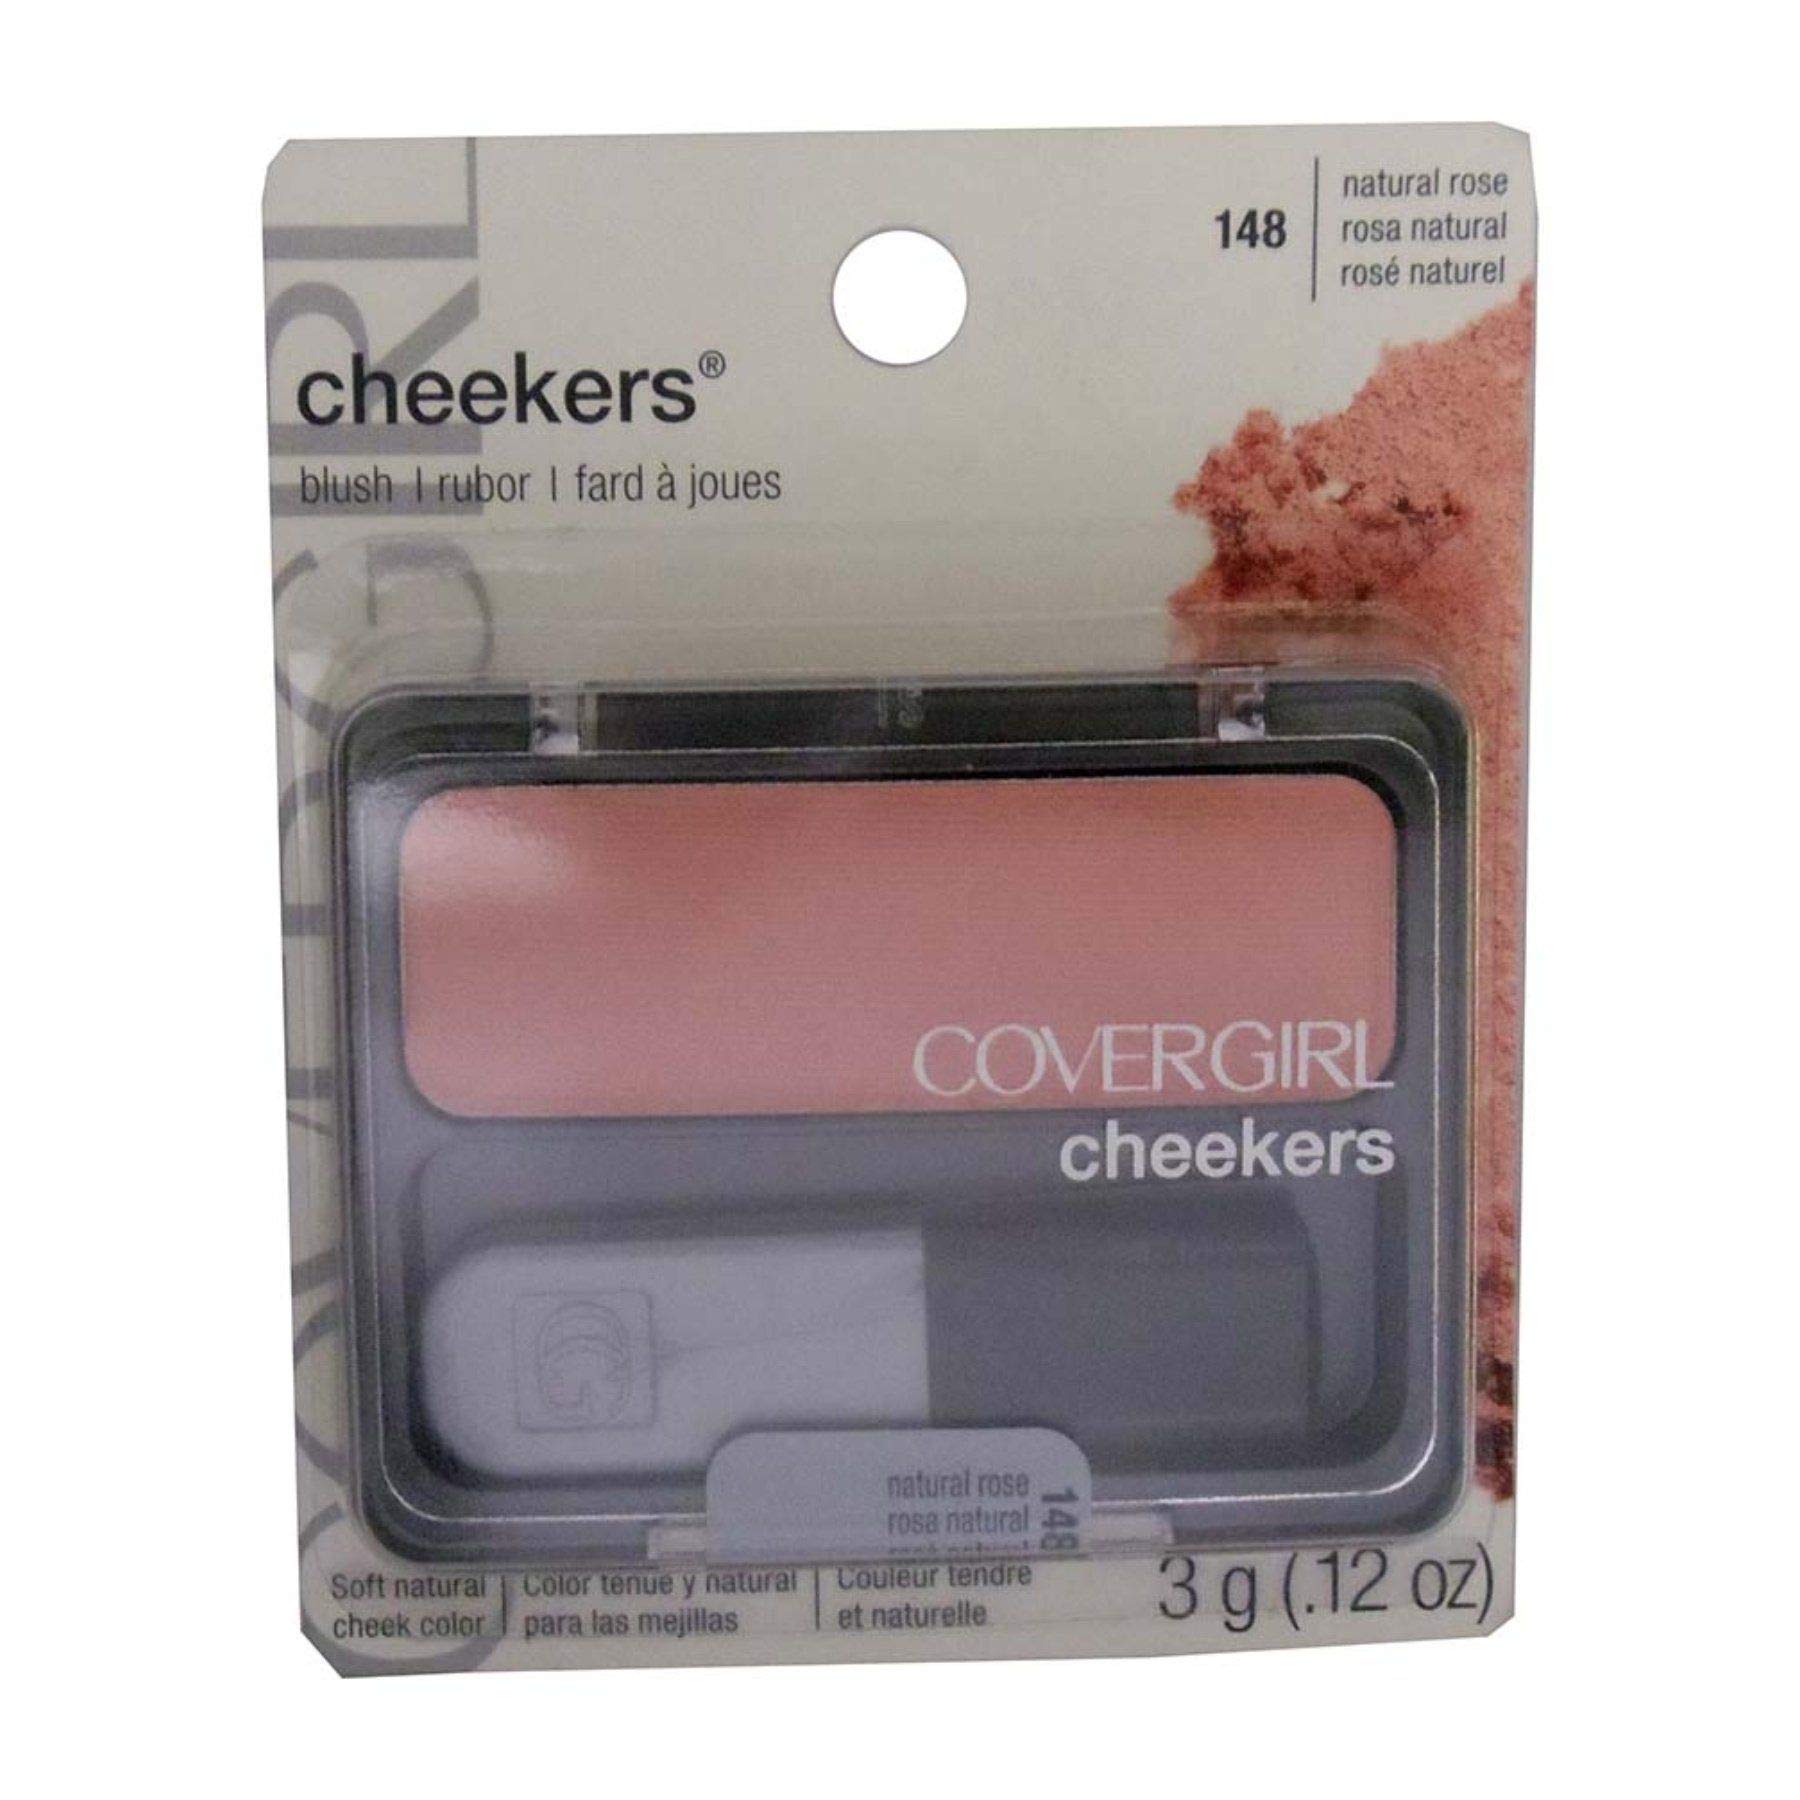 COVERGIRL Cheekers Blendable Powder Blush Natural Twinkle.12 oz, 1 Count